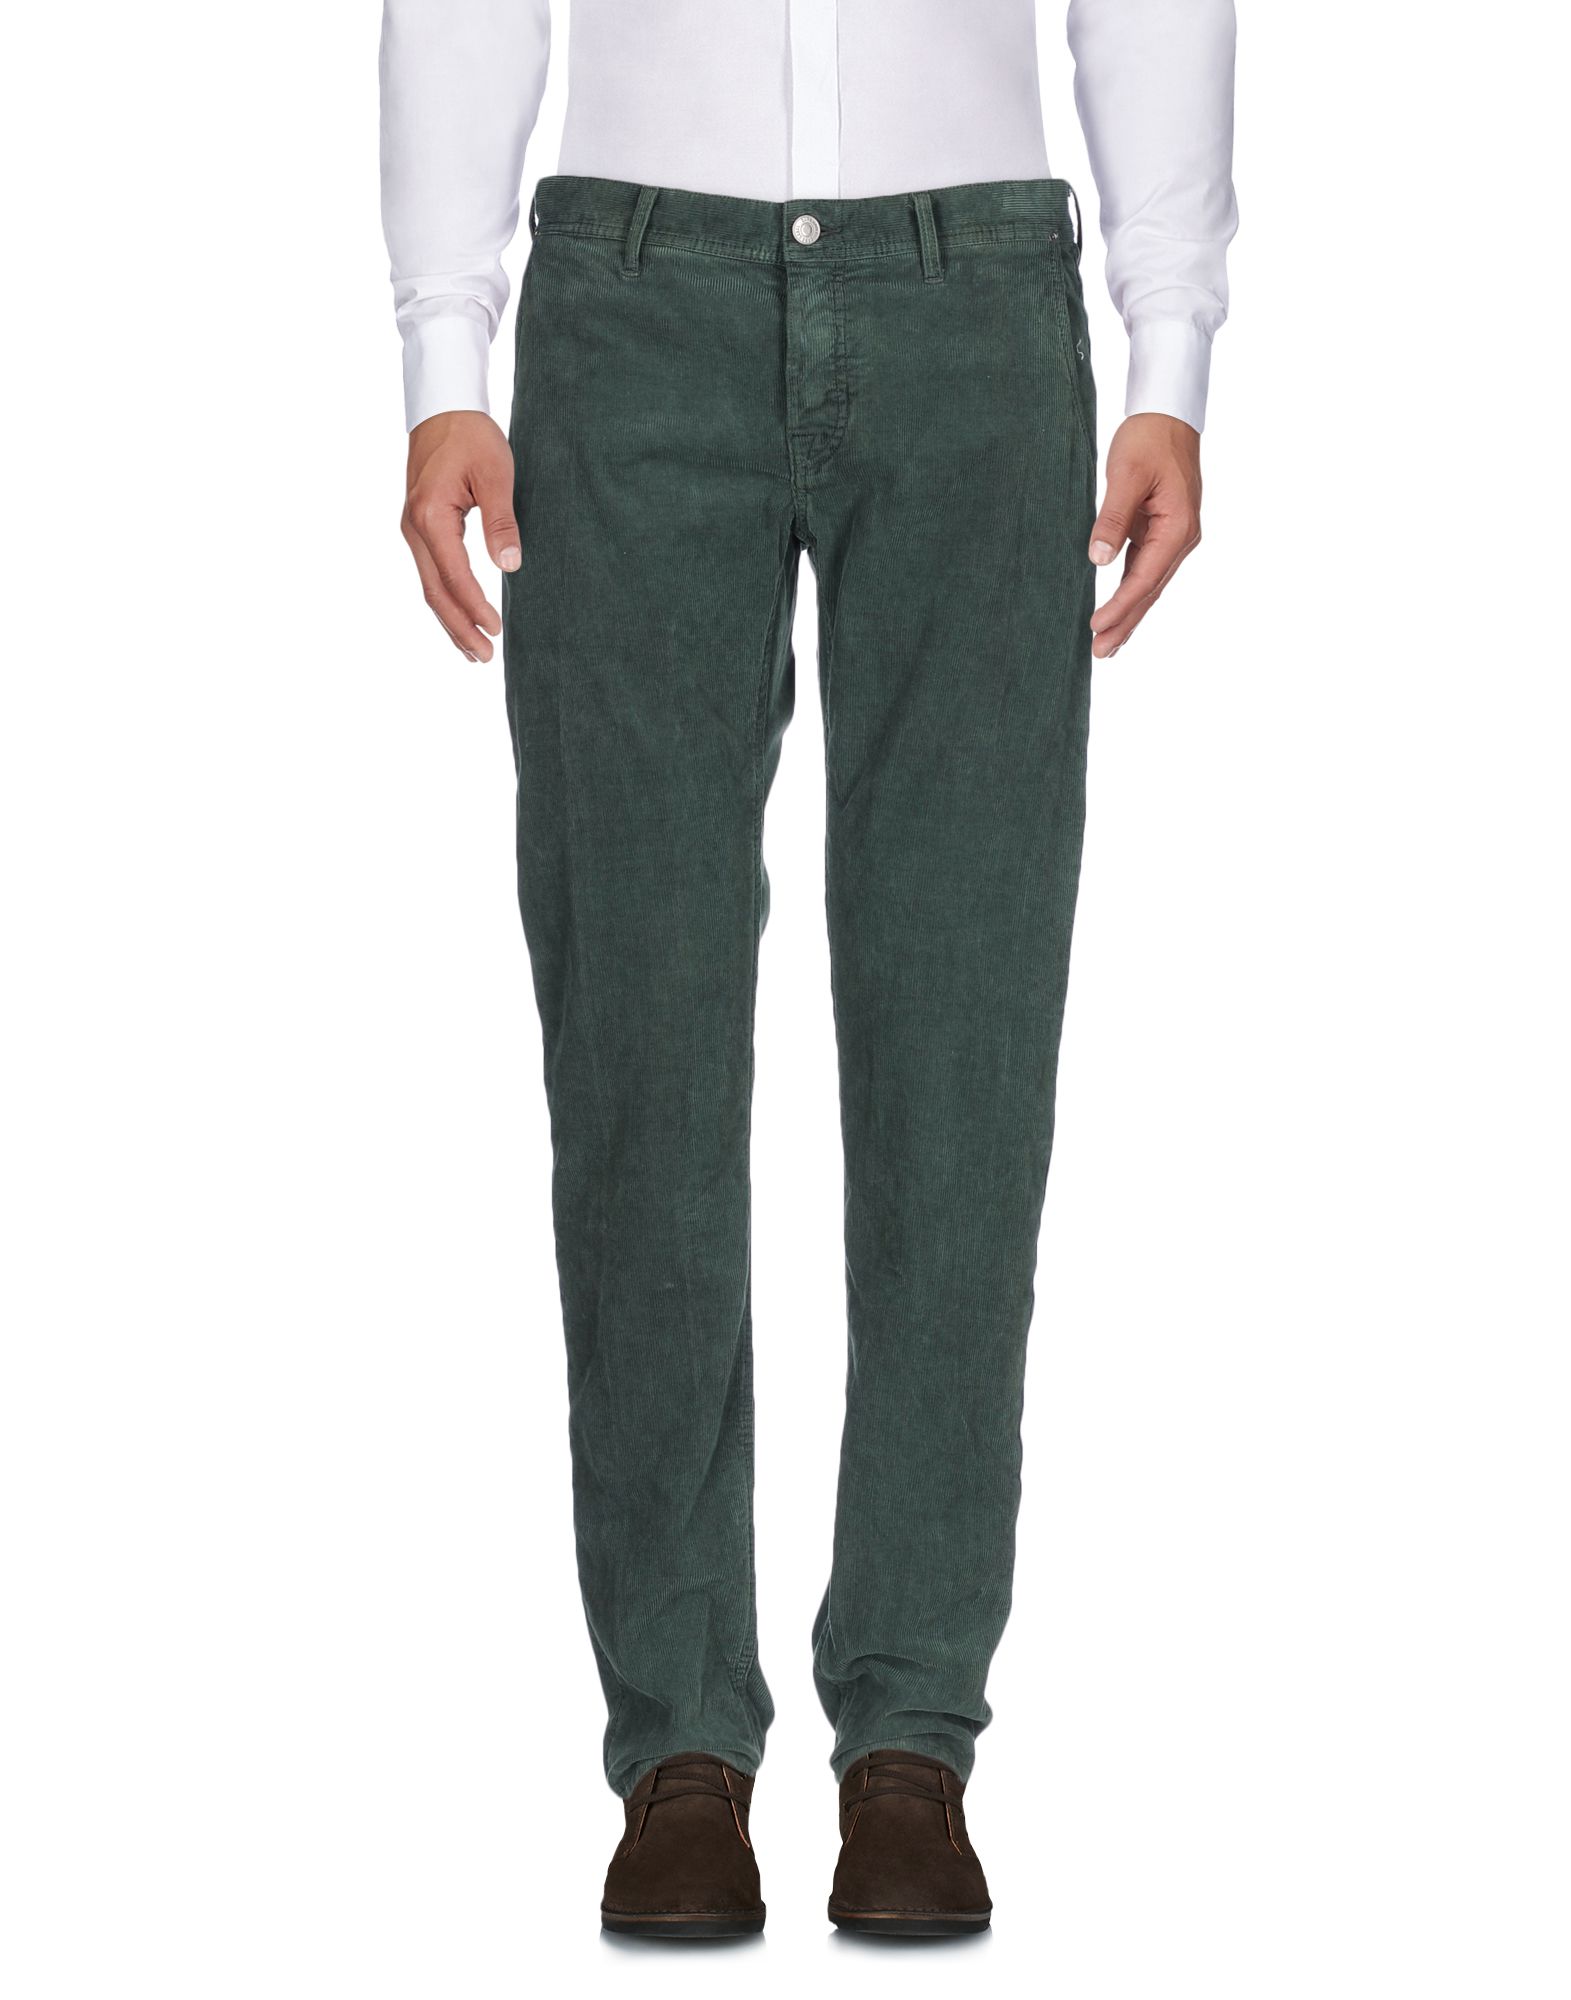 Care Label Pants In Green